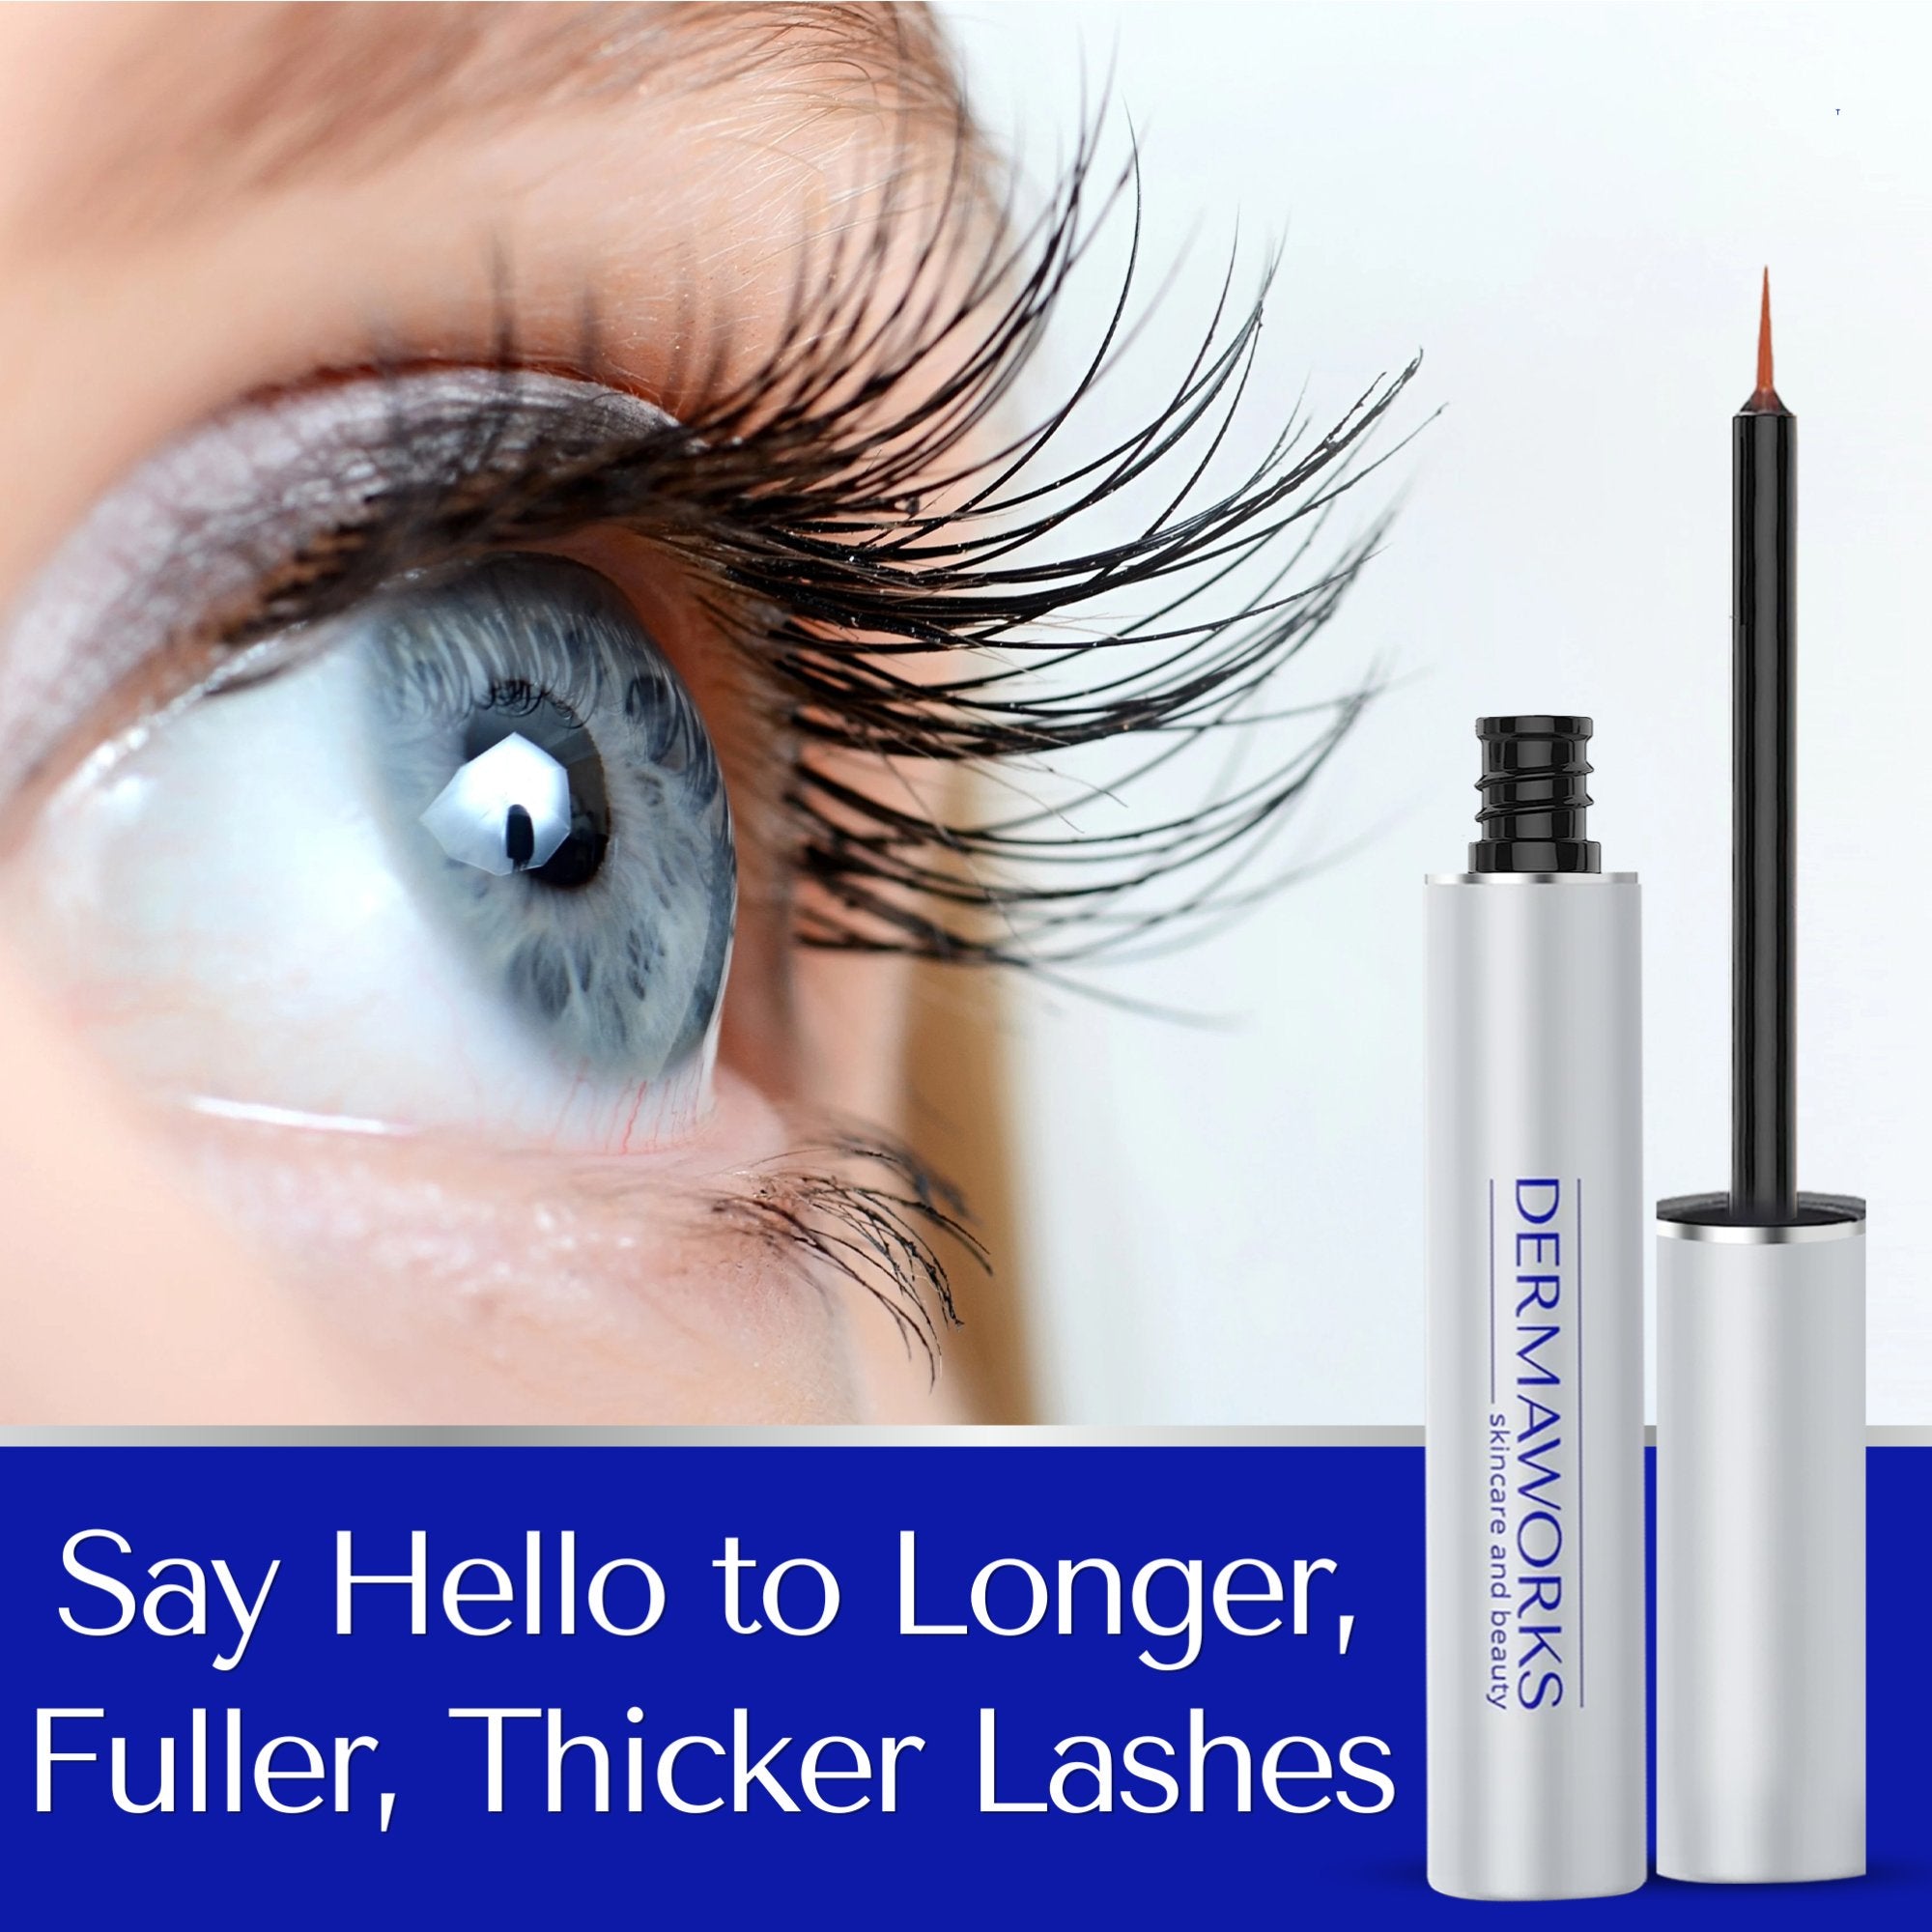 Say hello to longer, fuller and thicker lashes with Spectaculash lash growth serum 